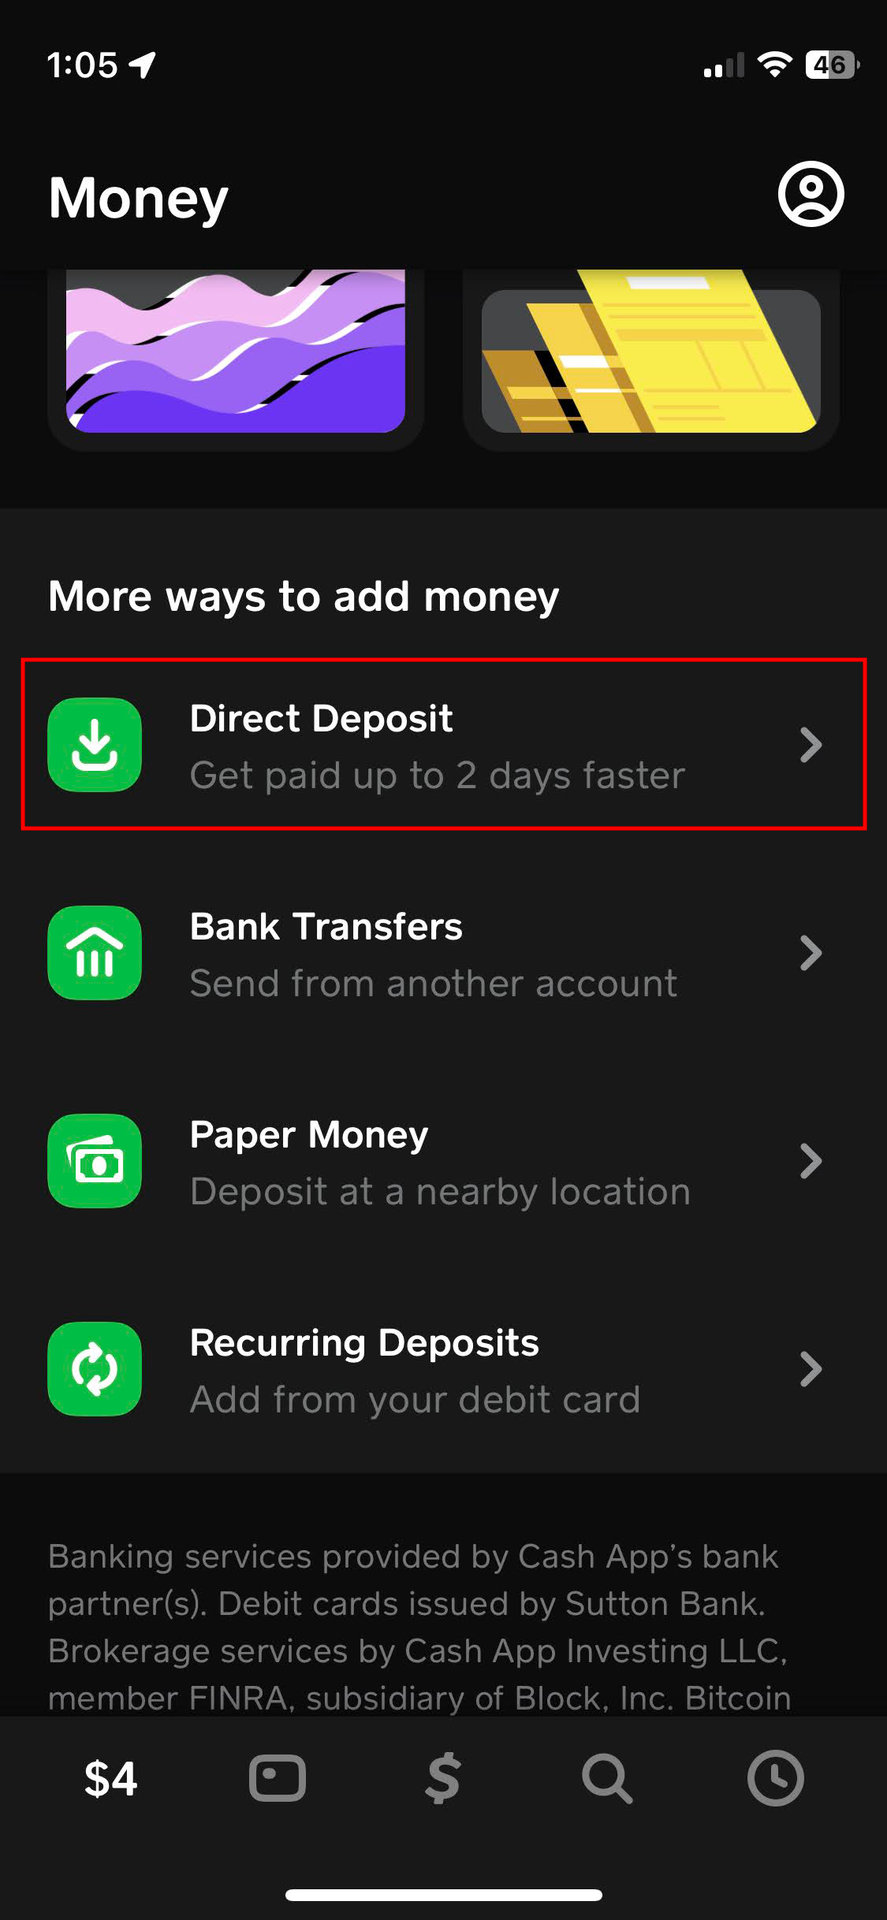 How to set up direct deposit on Cash App using Automatic Setup 2